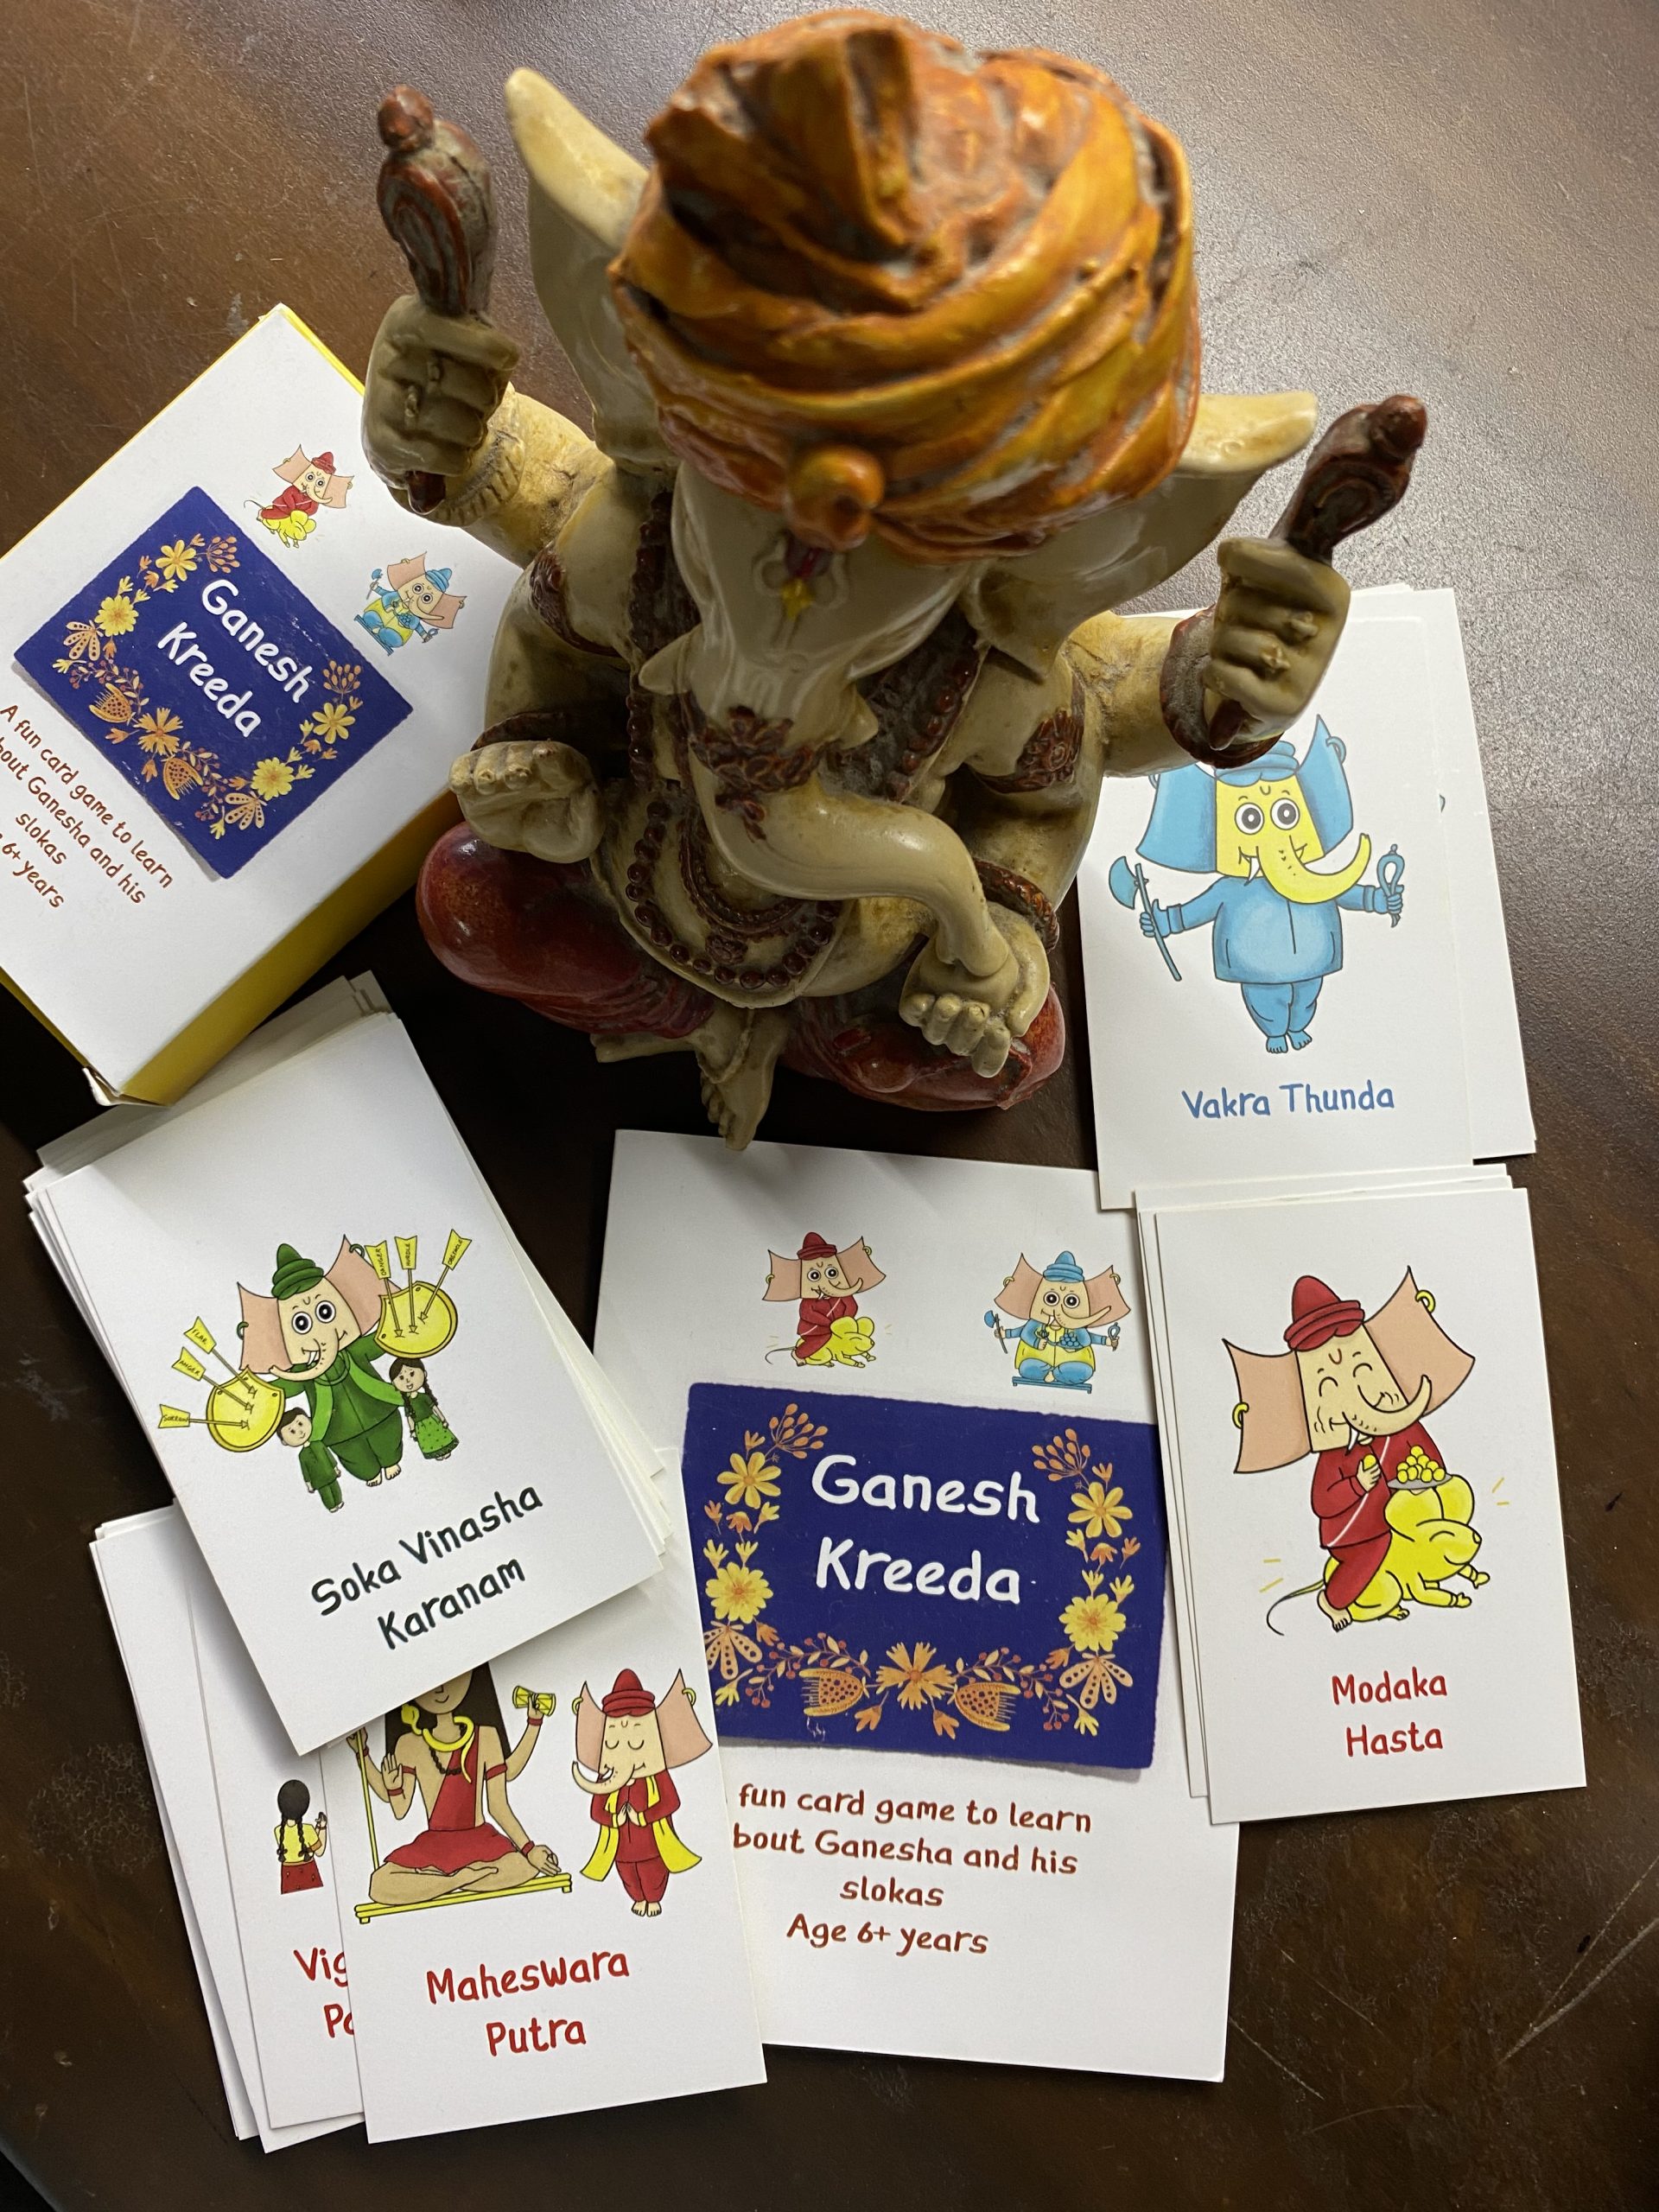 Ganesha flashcards aid learning slokas and hence help young children reconnect with hindu mythology in a fun way.